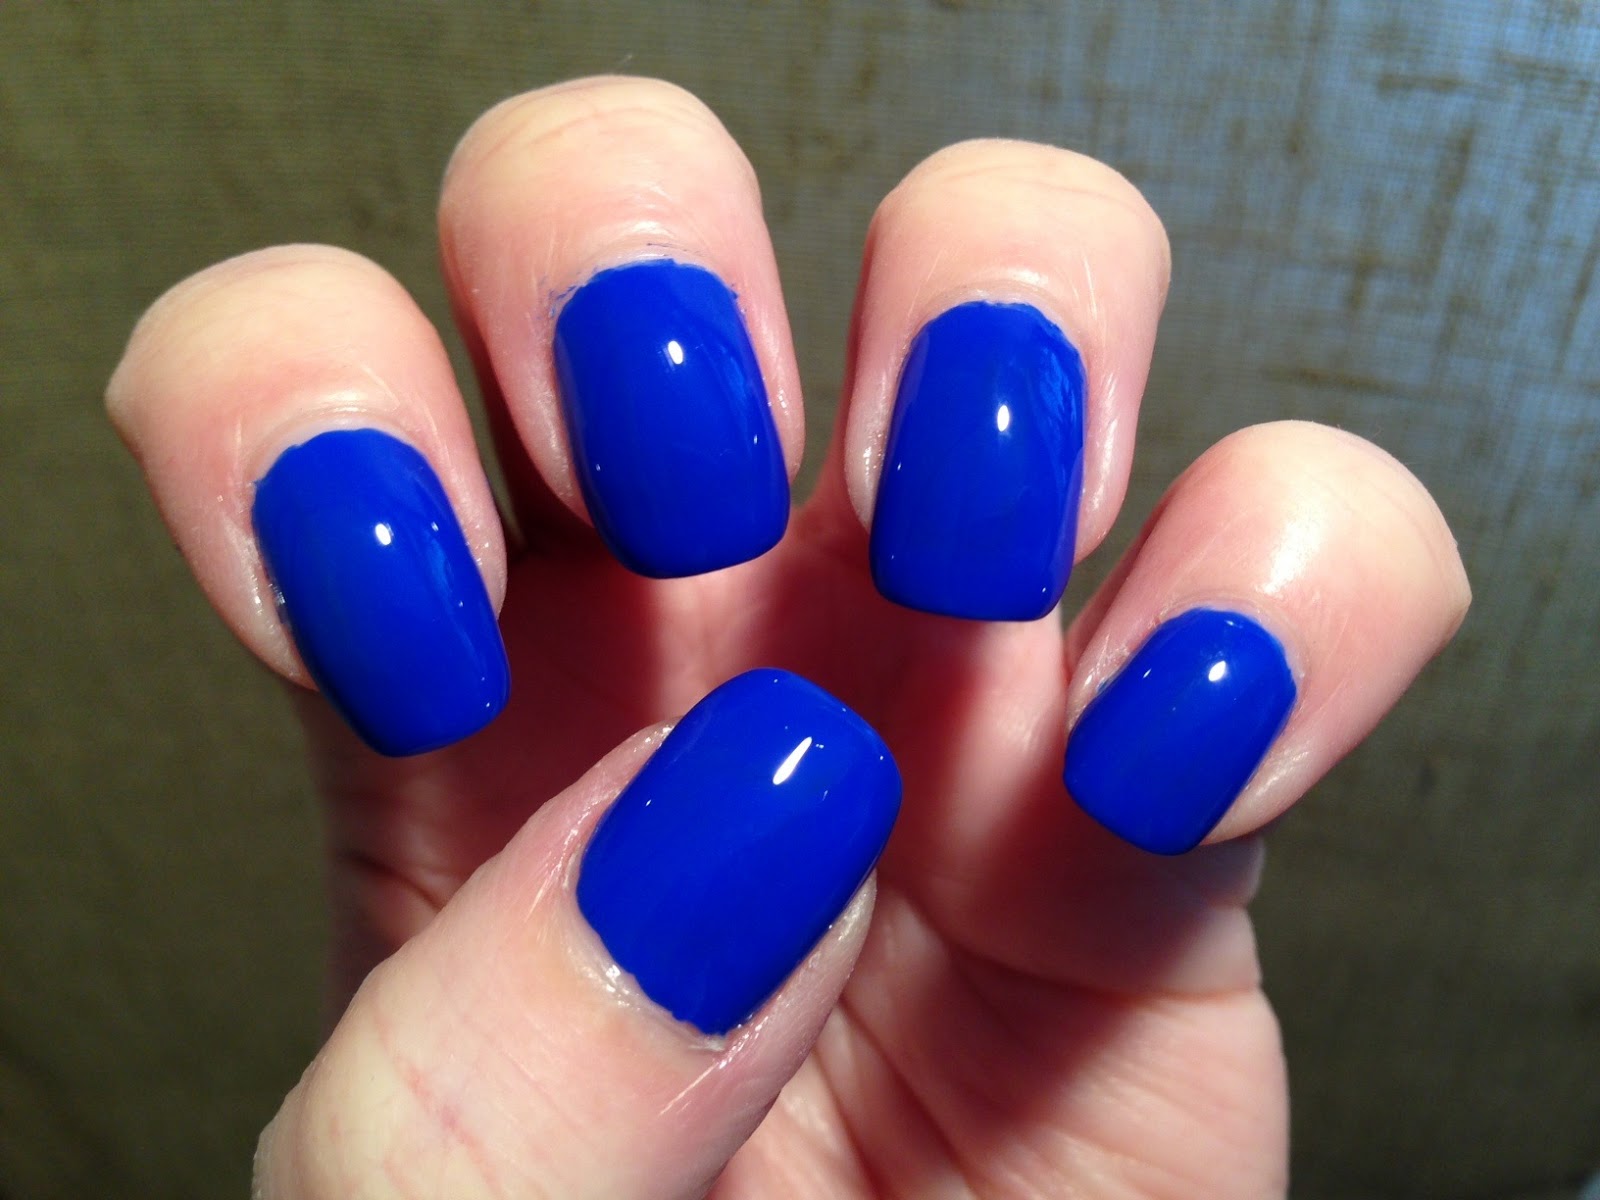 8. Sinful Colors Professional Nail Polish in "Endless Blue" - wide 3